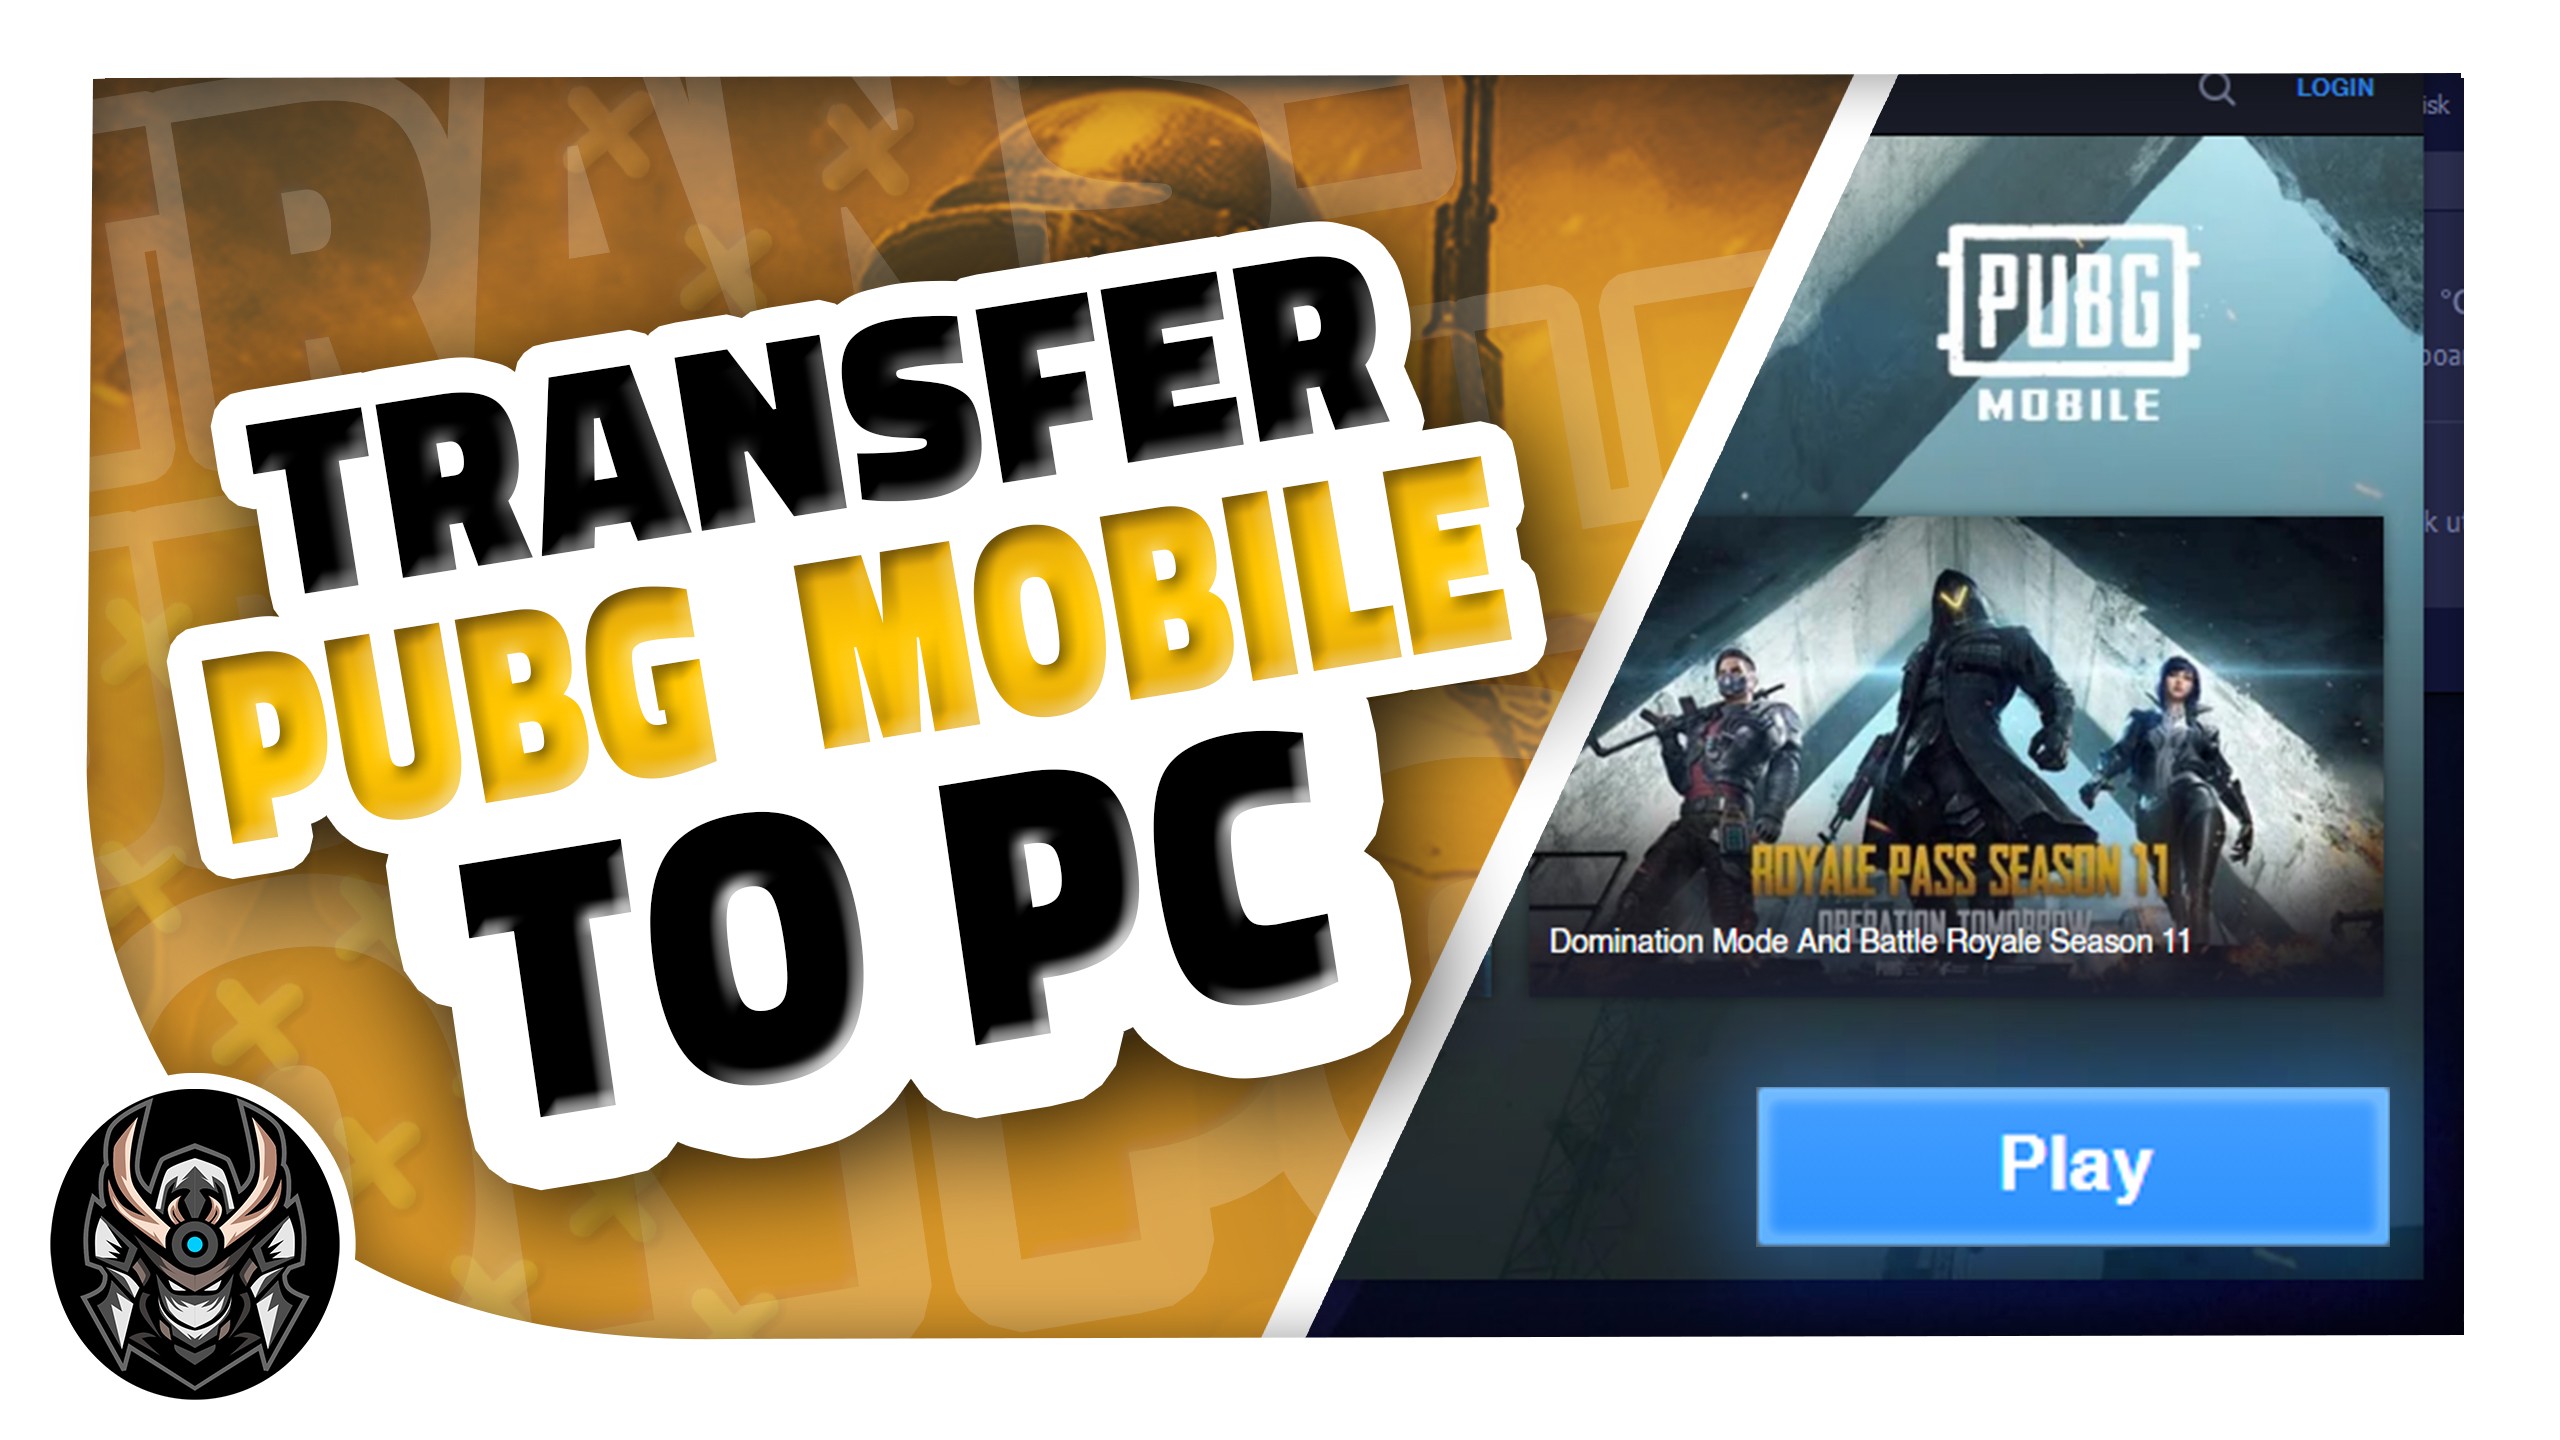 How to install PUBG MOBILE in GameLoop by copy pasting apk and obb